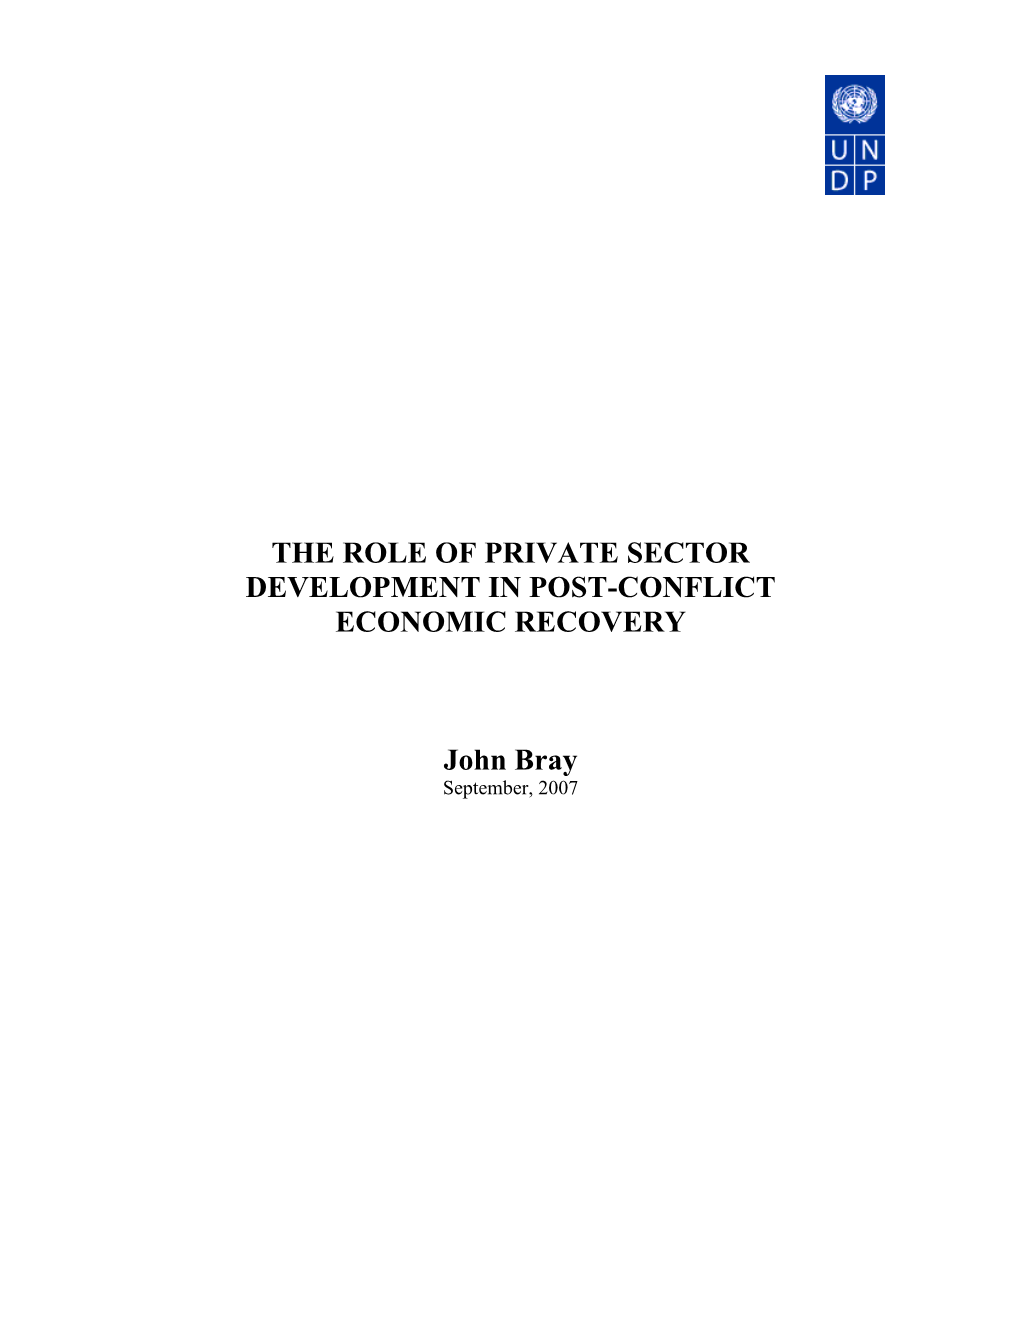 The Role of Private Sector Development in Post-Conflict Economic Recovery